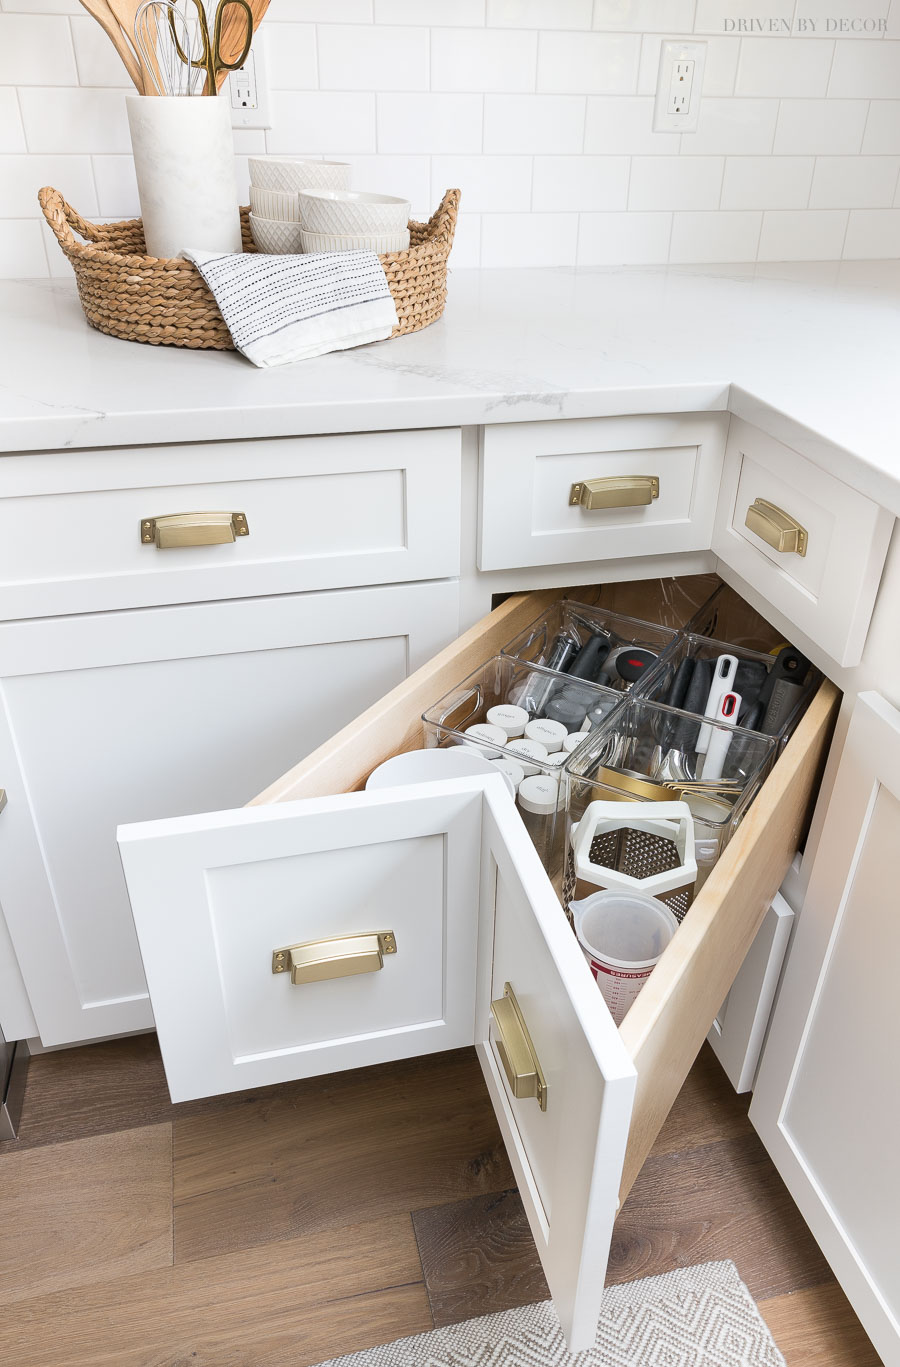 A super smart solution for using the corner space in a kitchen - kitchen corner drawers!